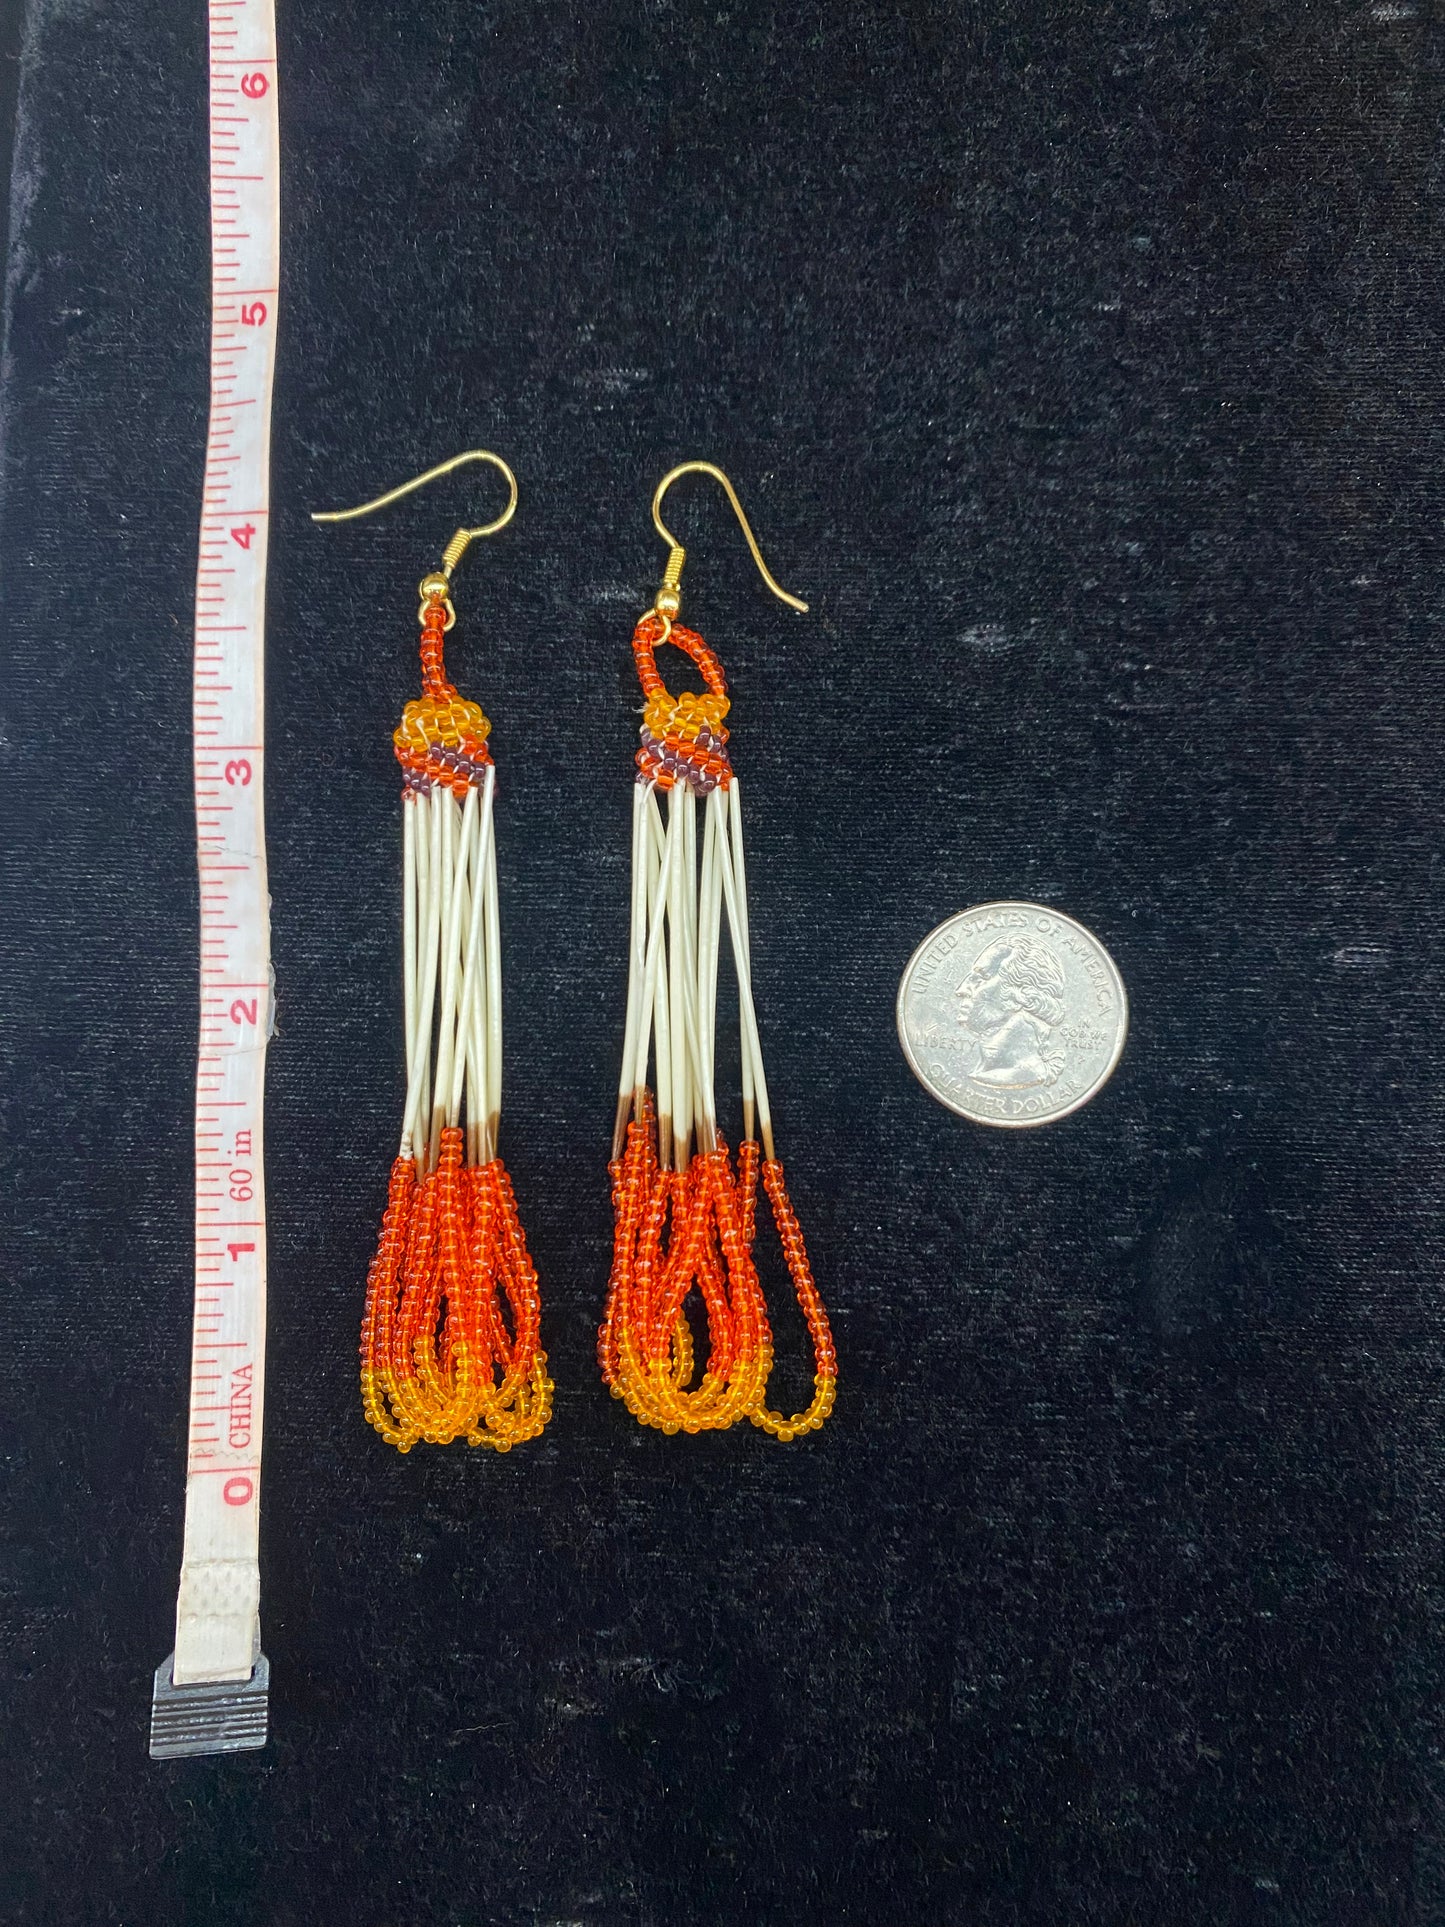 Vintage Porcupine Quills and Glass Seed Bead Dangles